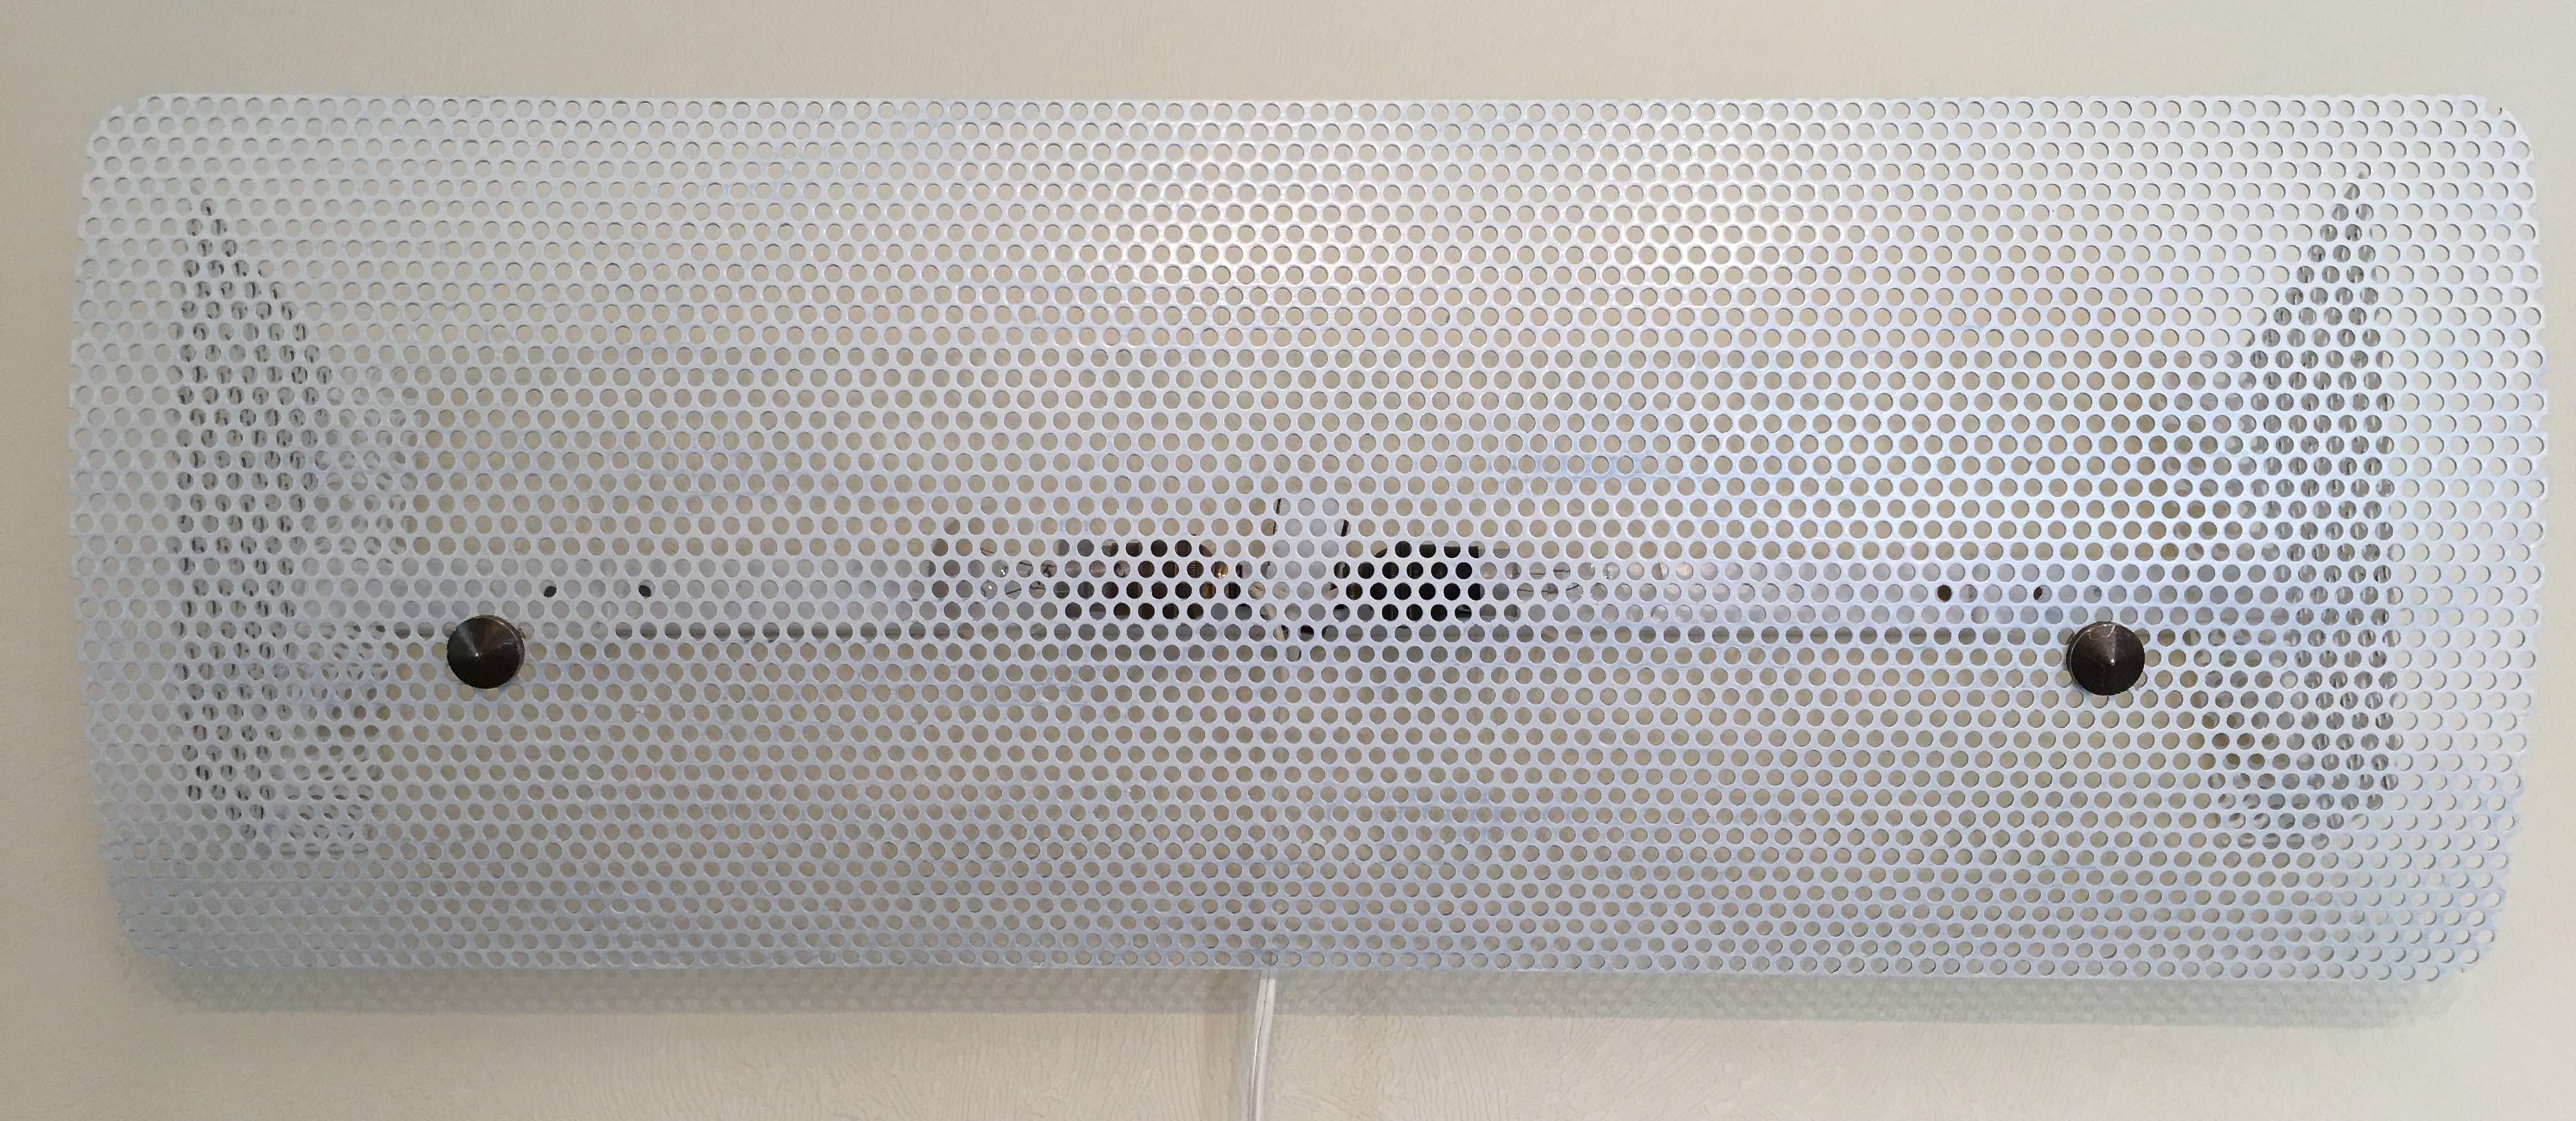 Mid-Century Modern Pierre Guariche G320 Large White Perforated Metal Wall Lamp, 1952, France For Sale